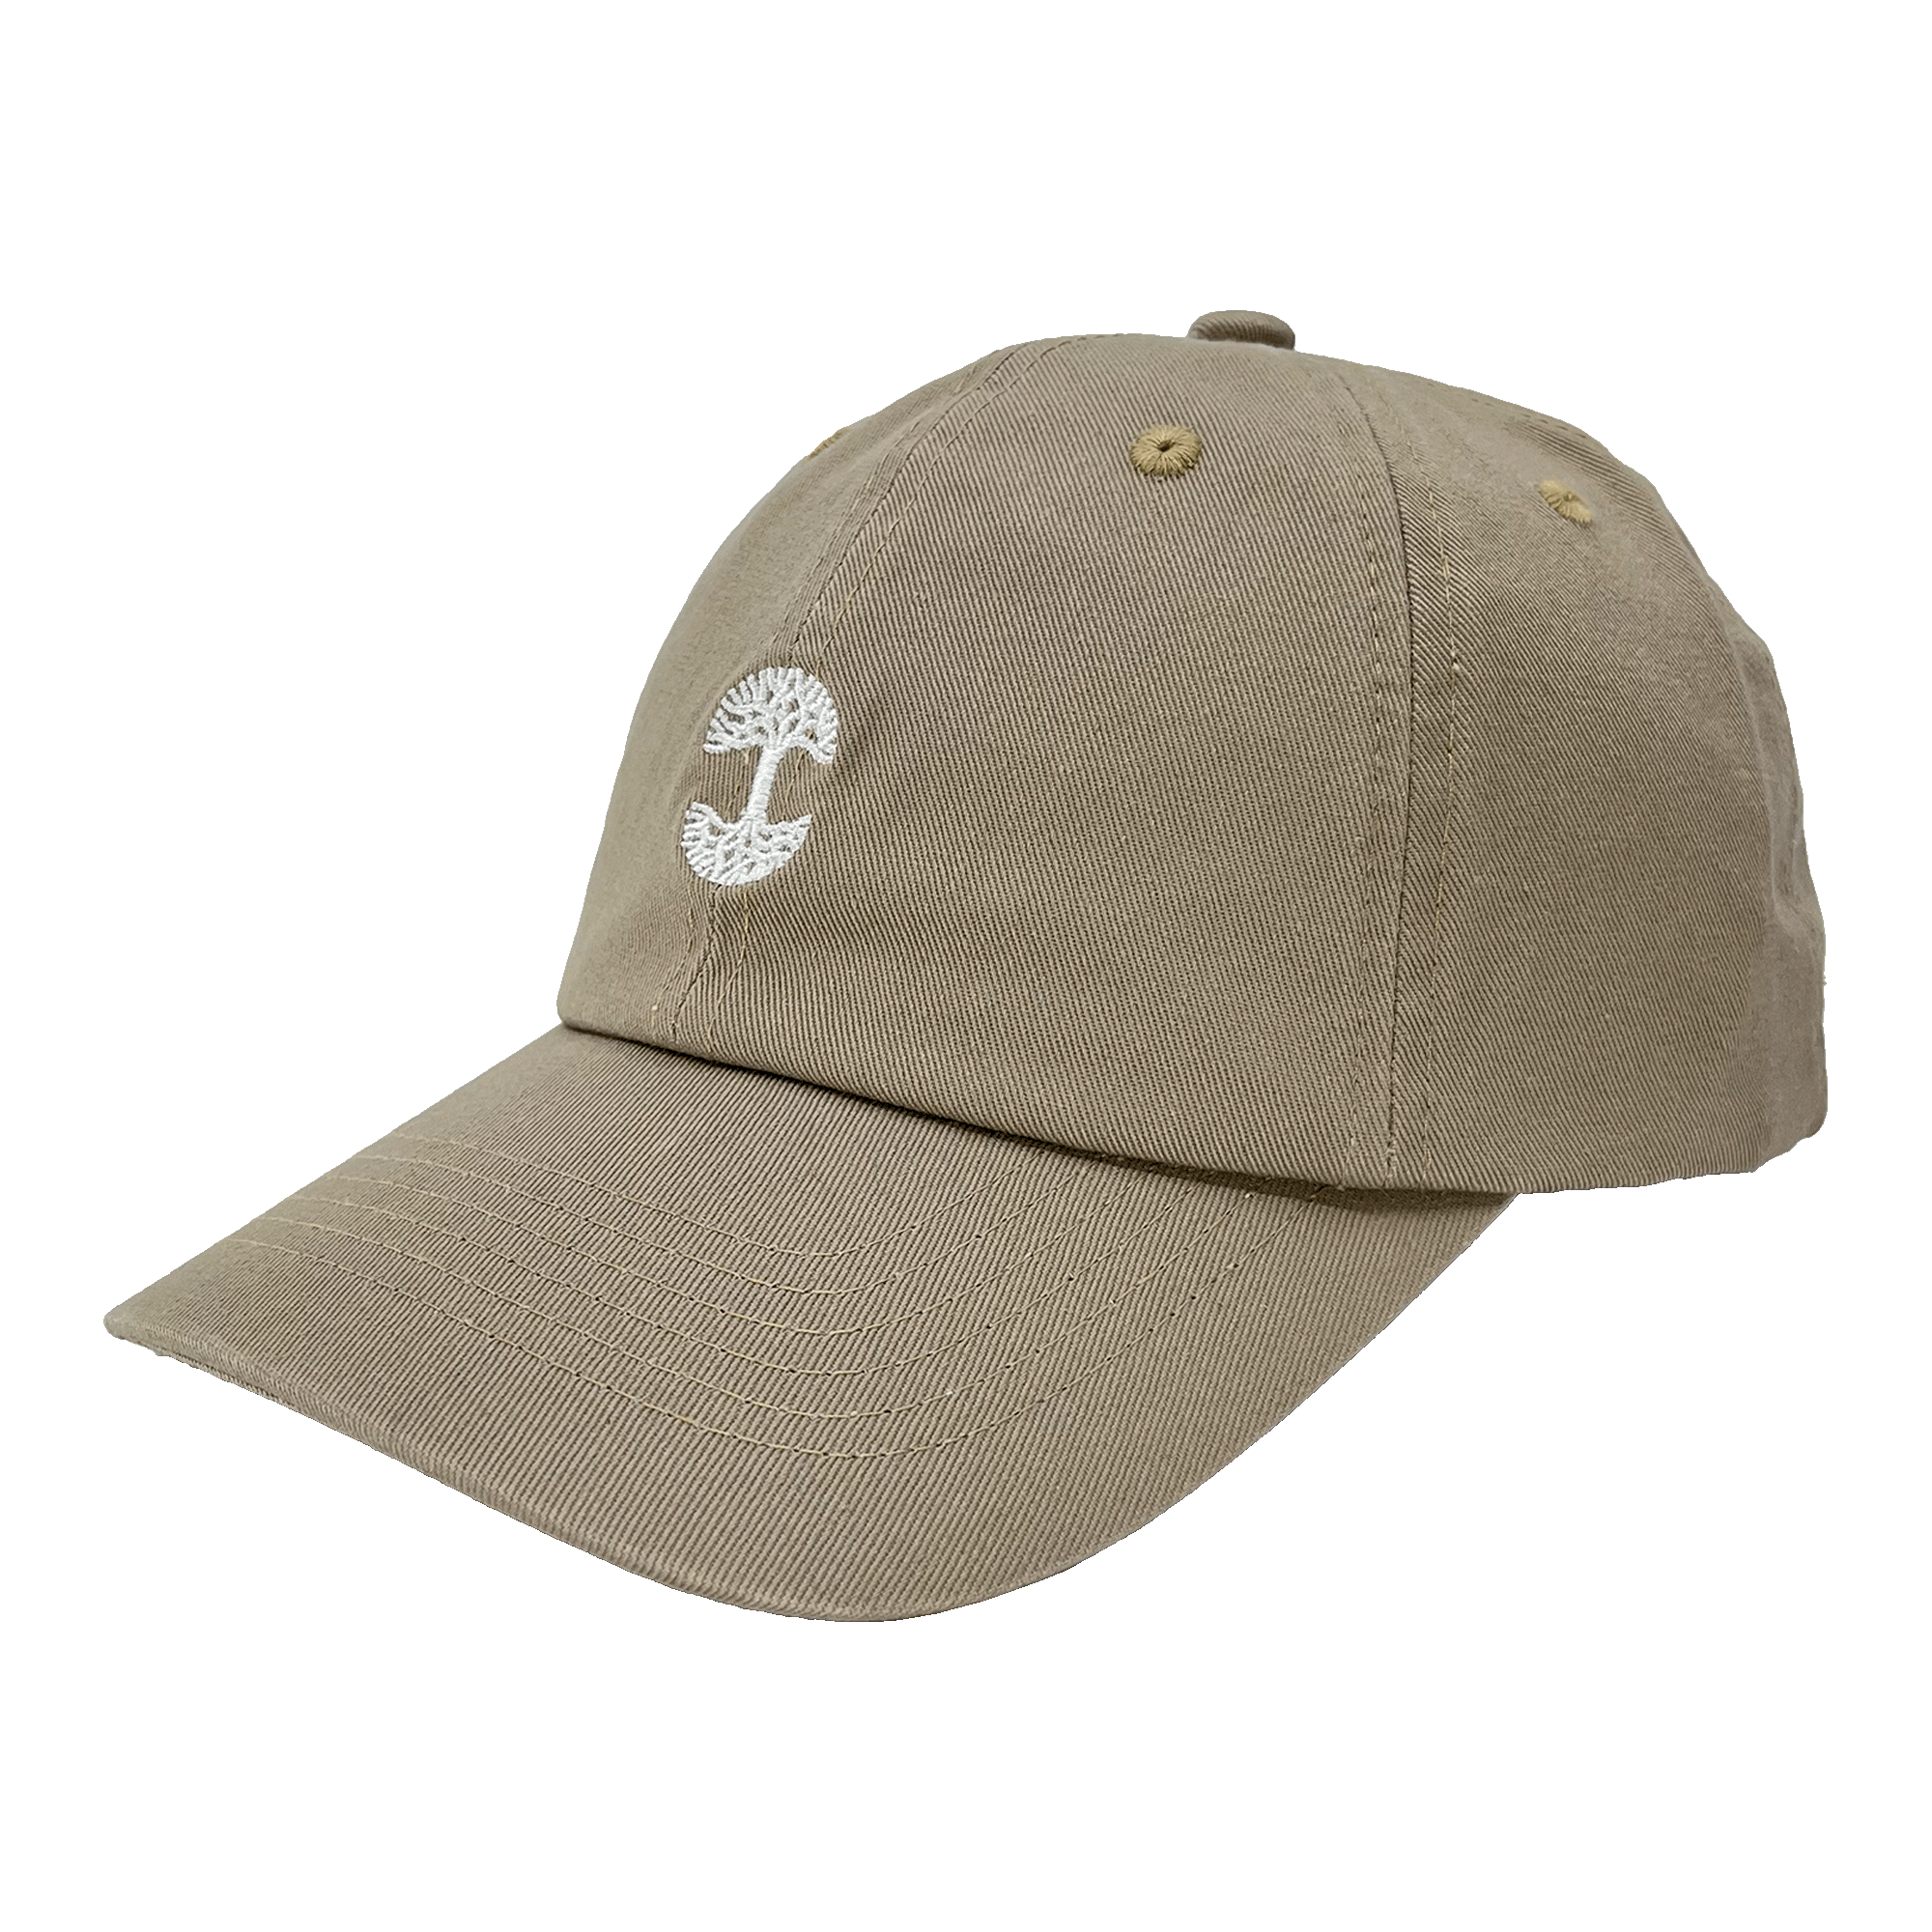 Side view of Khaki brow dad cap with micro-sized white embroidered Oaklandish tree logo on the crown.